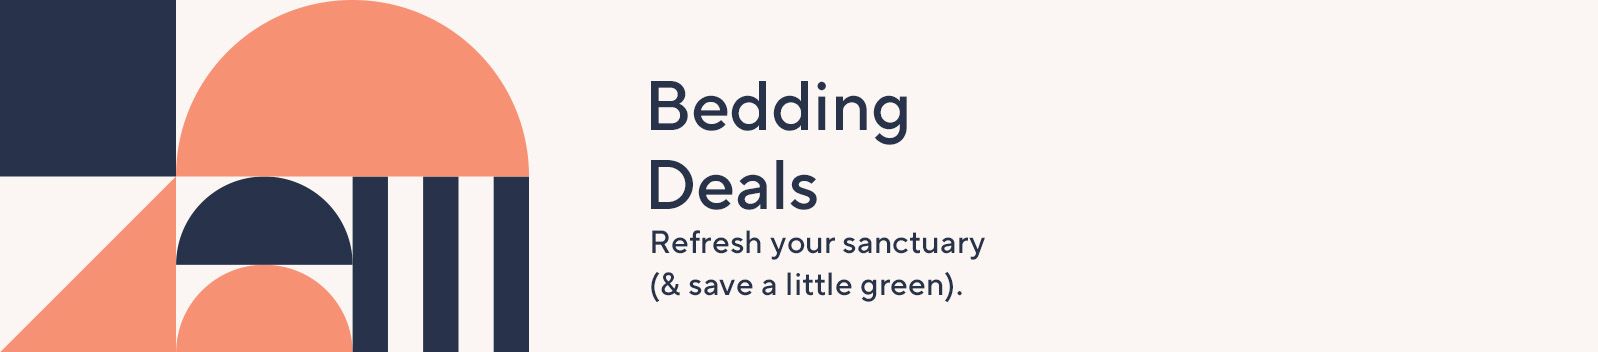 Bedding Deals. Refresh your sanctuary (& save a little green).